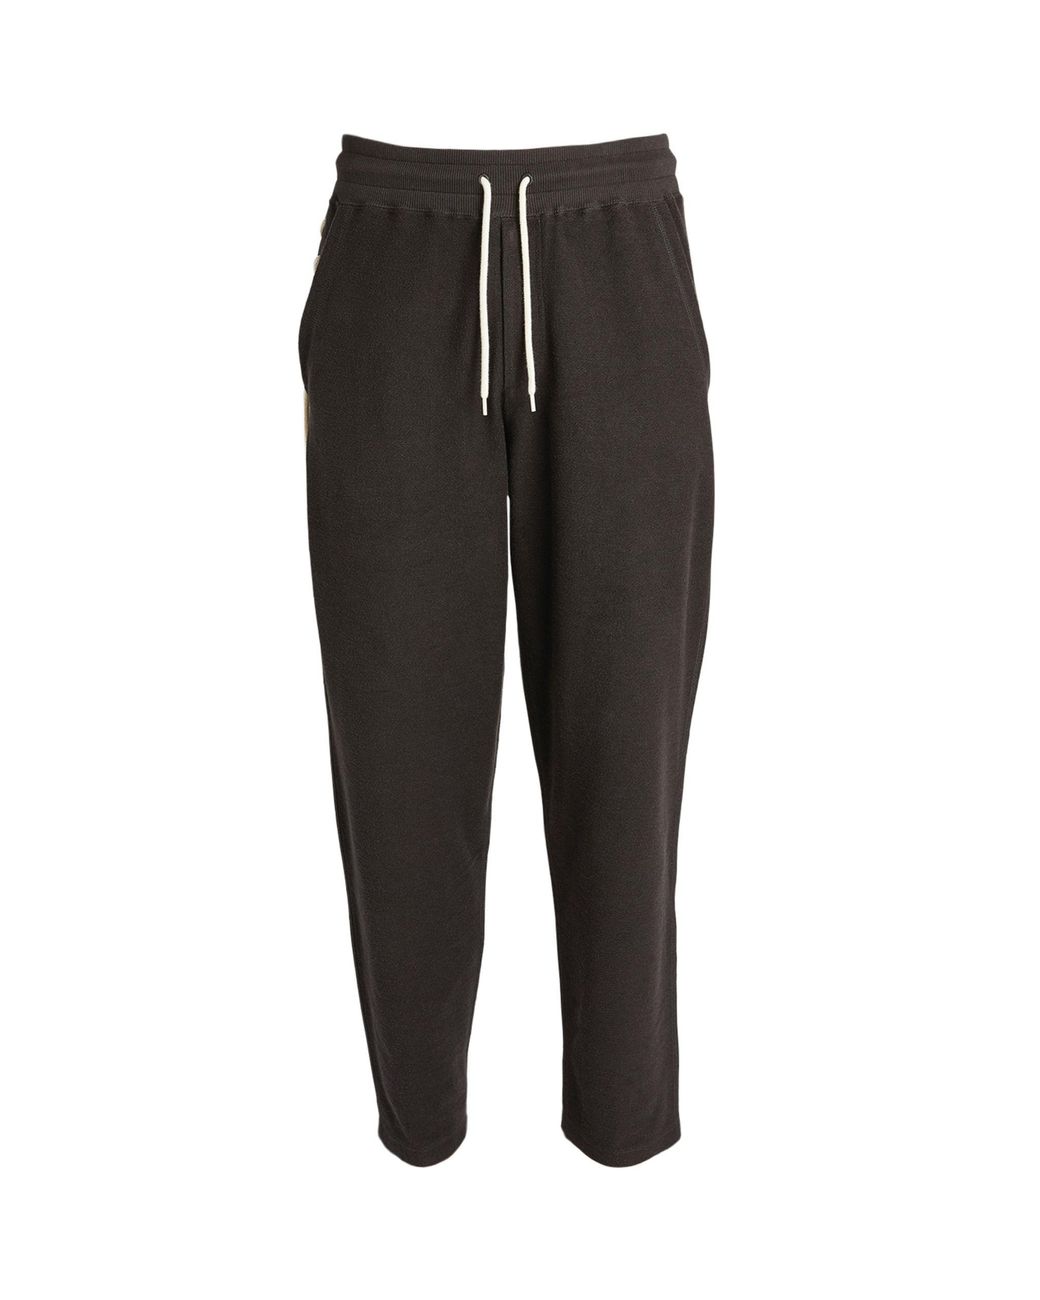 Craig Green Laced Sweatpants in Black for Men - Lyst